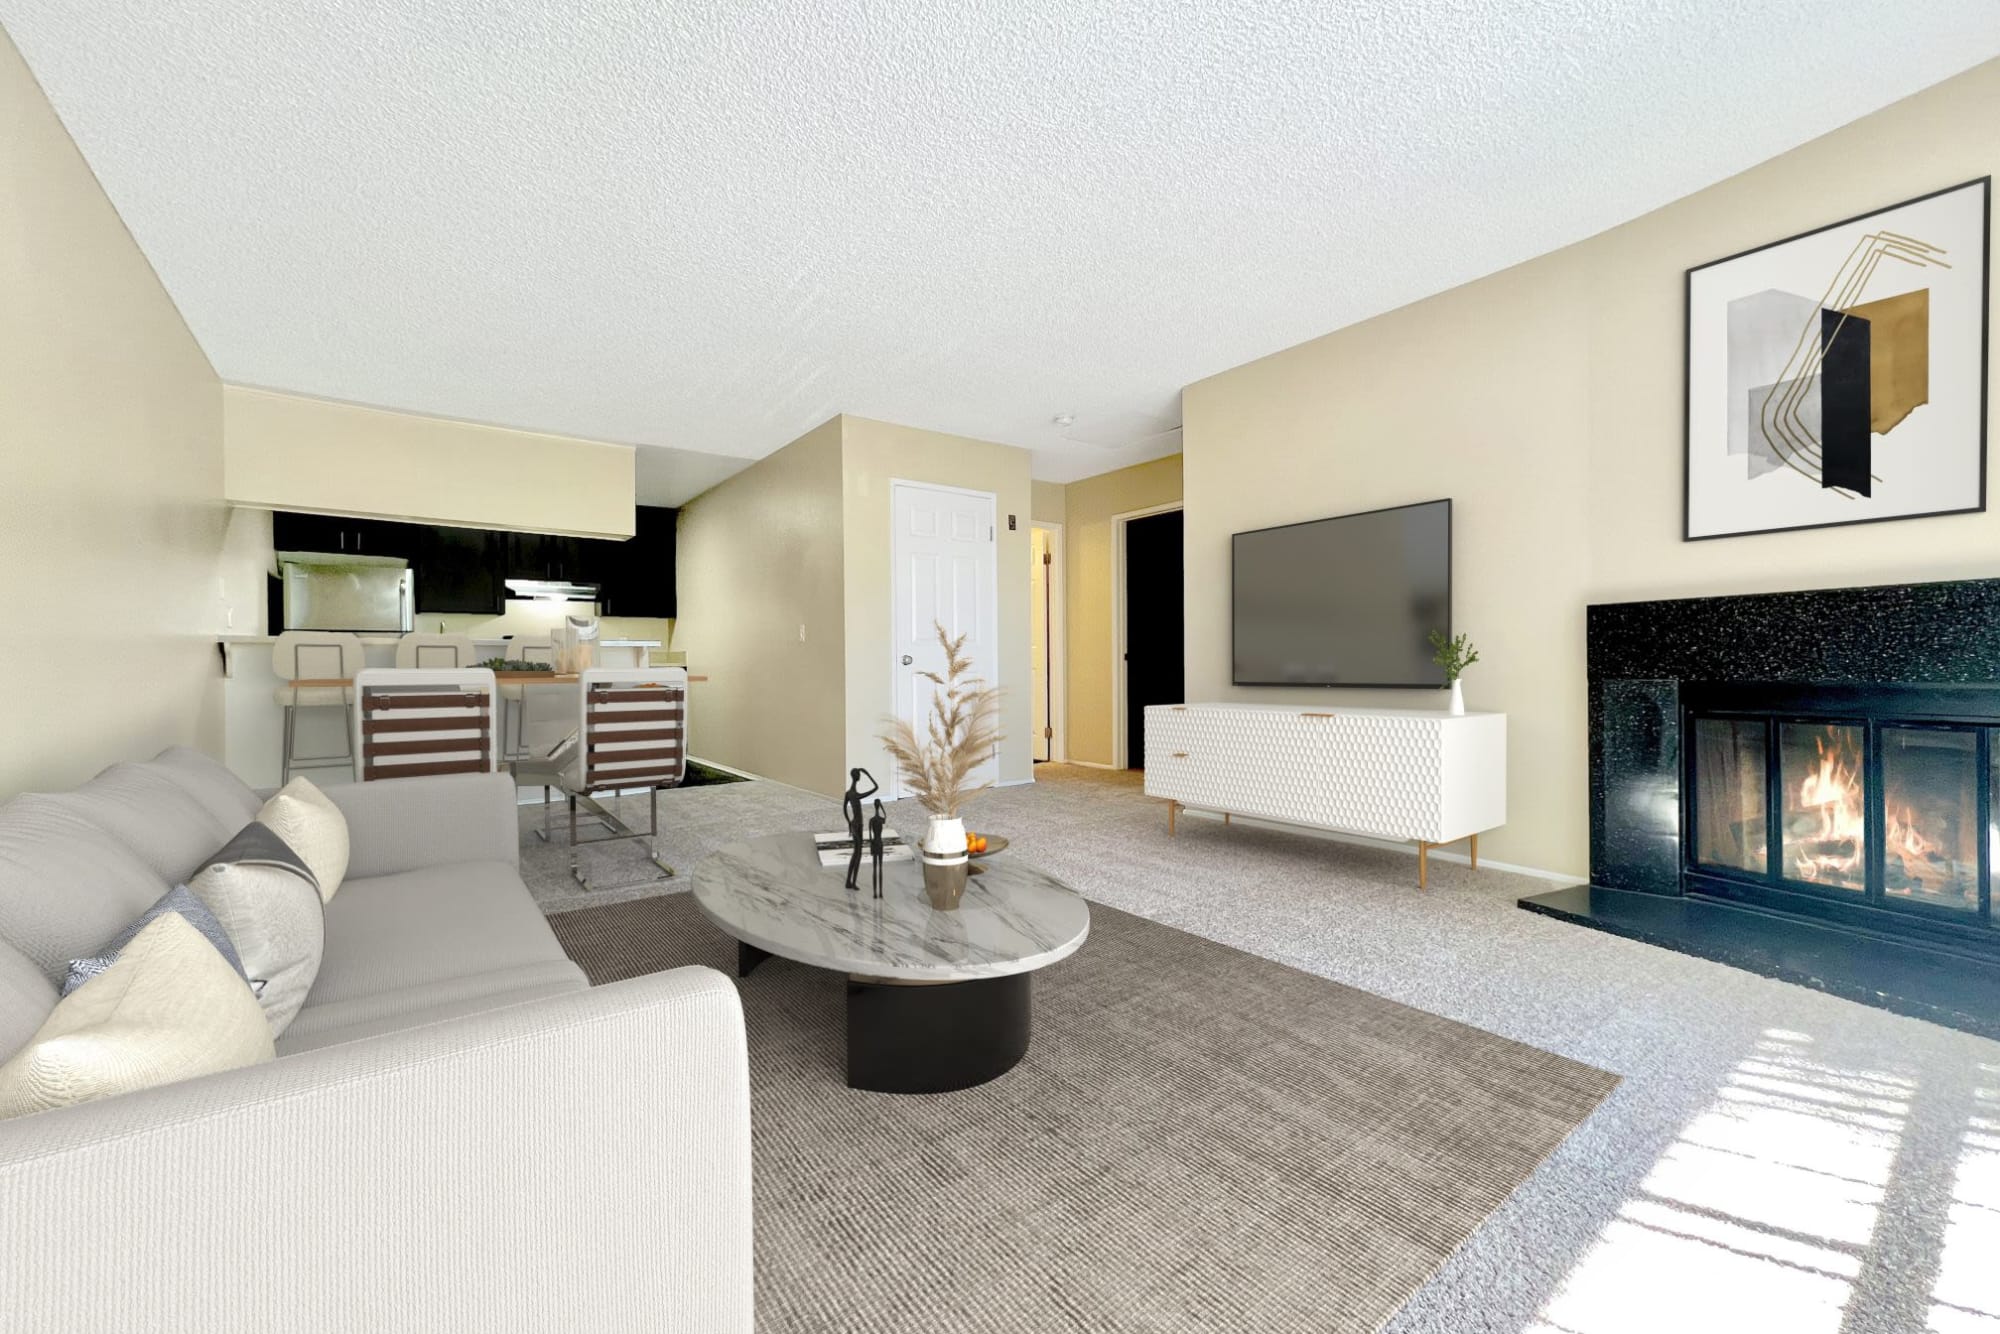 Spacious Living room with Fireplace at Hillside Terrace Apartments in Lemon Grove, California